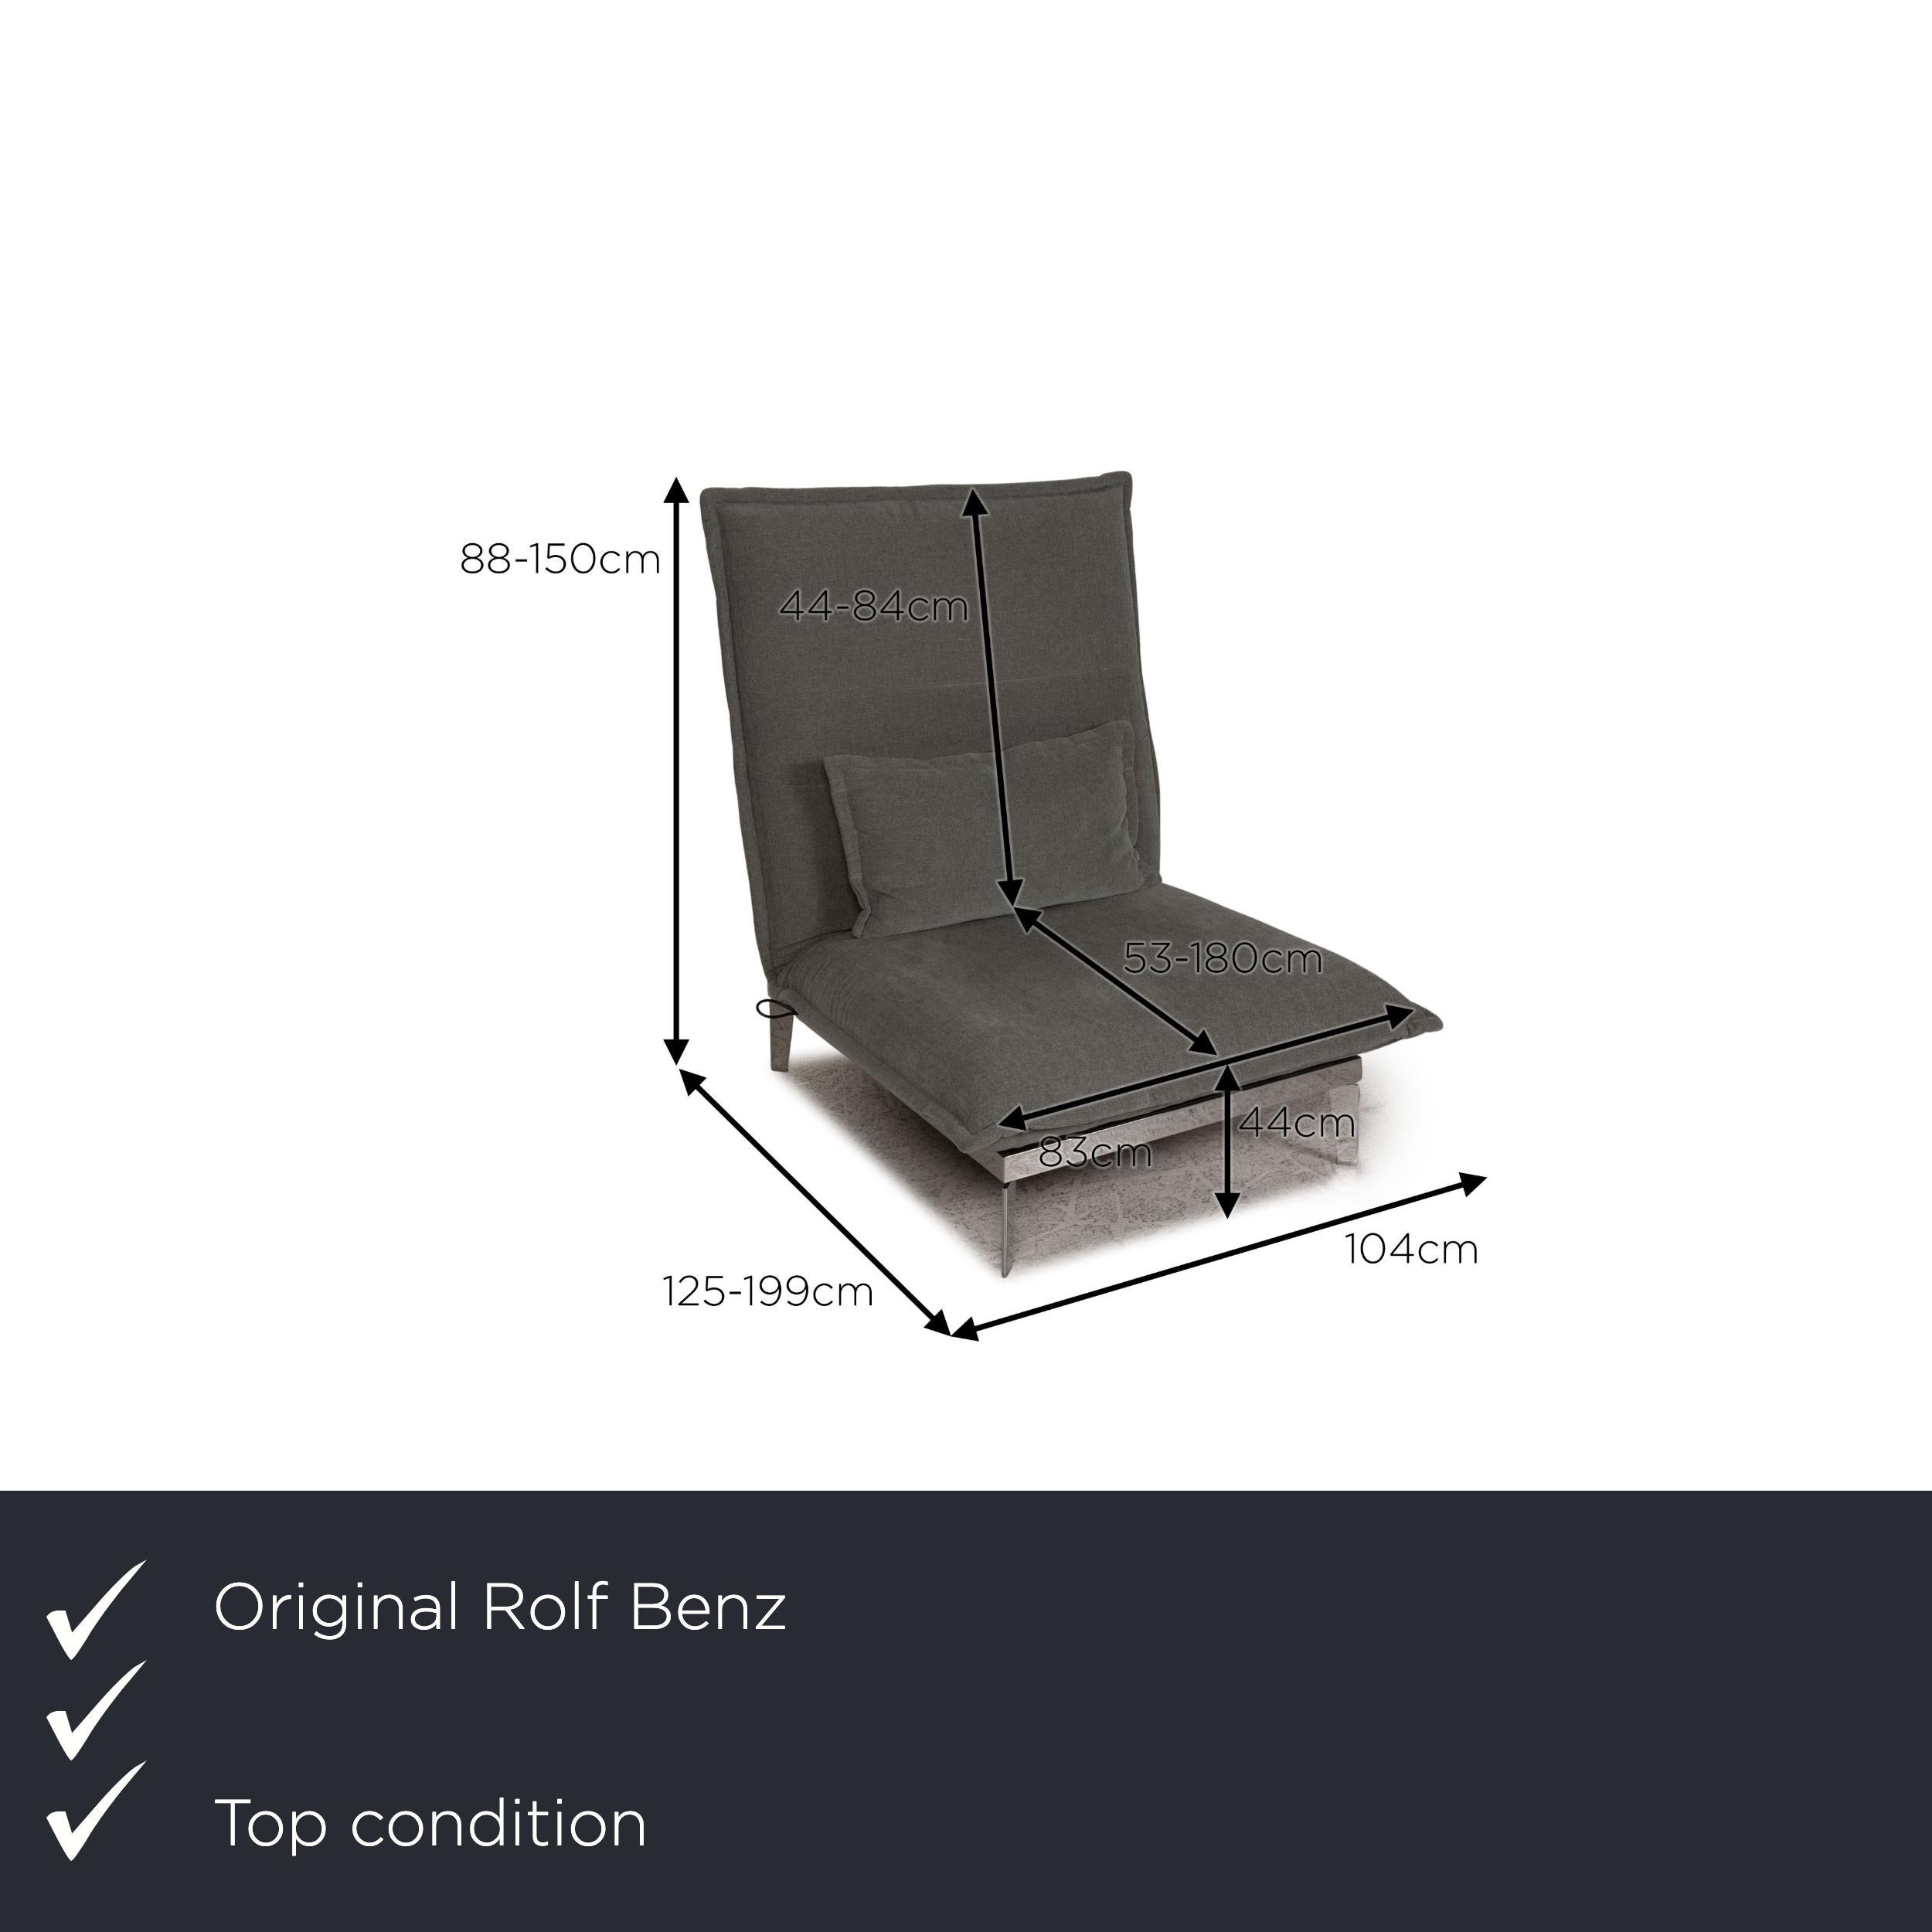 We present to you a Rolf Benz Nova 340 fabric armchair gray function relax function.

Product measurements in centimeters:

depth: 125
width: 104
height: 88
seat height: 44
seat depth: 53
seat width: 83
back height: 44.


 